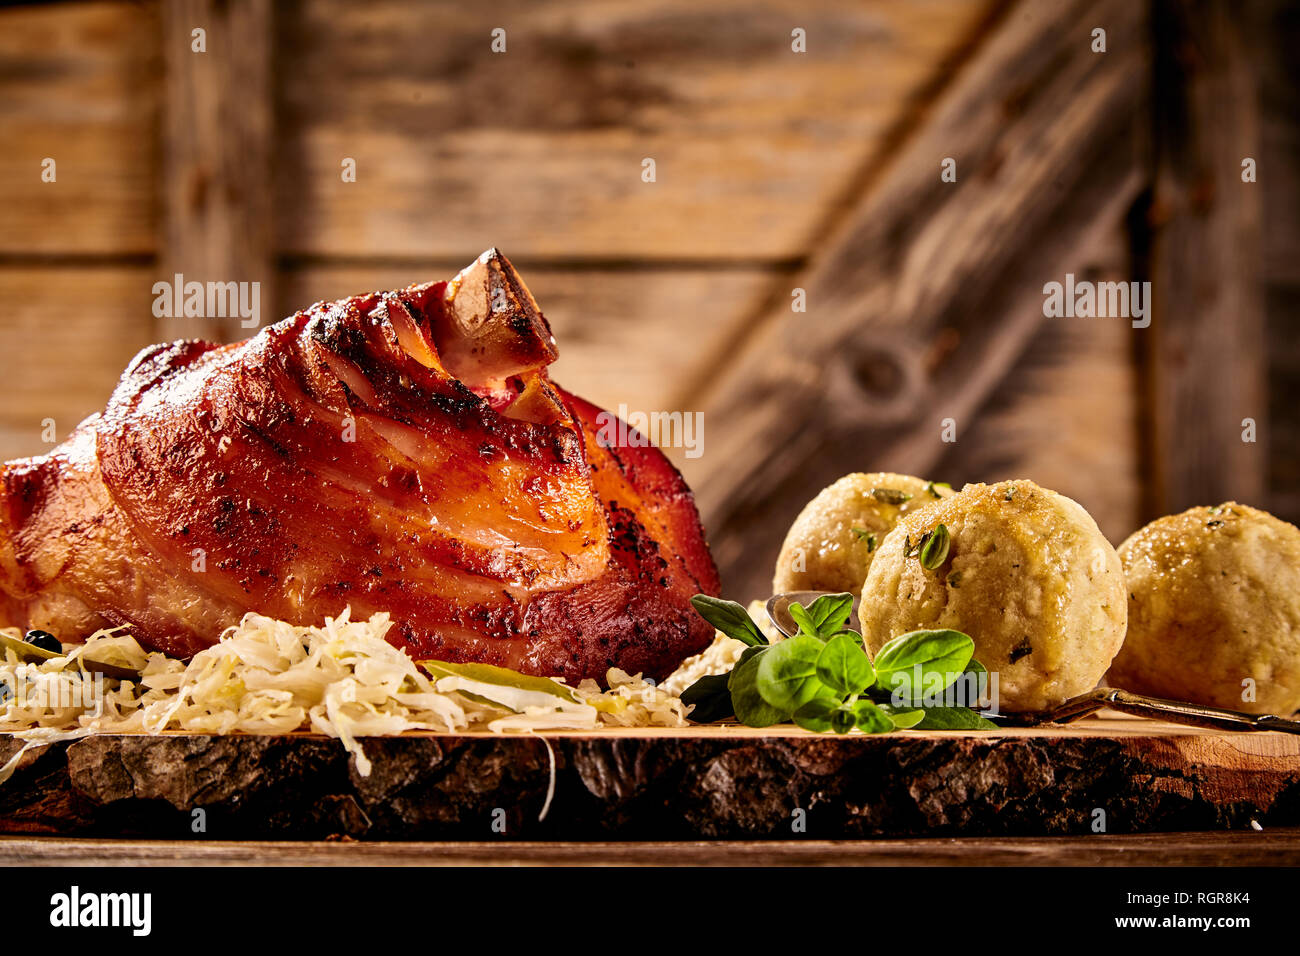 Crispy glazed roasted pork hock with crackling served with sauerkraut and savory dumplings in a low angle view Stock Photo